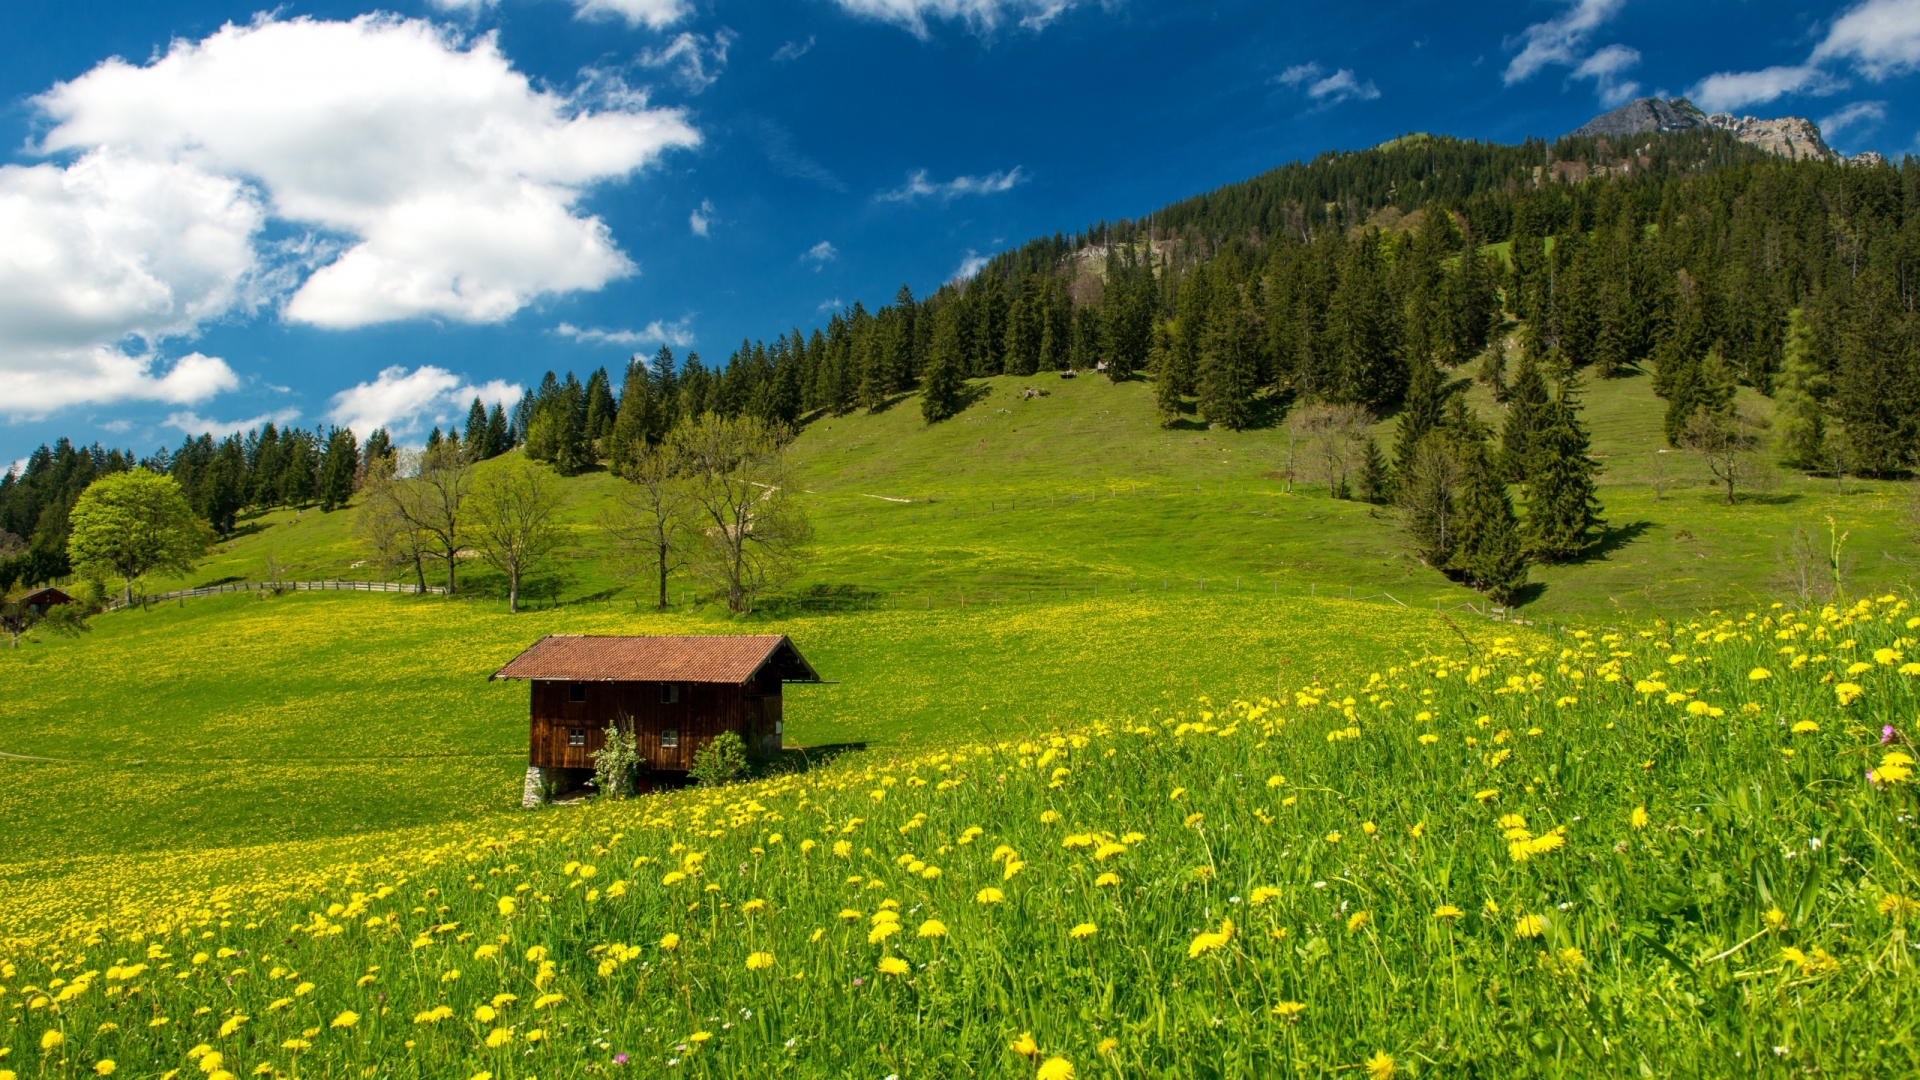 Pasture in the Bavarian Alp for 1920 x 1080 HDTV 1080p resolution